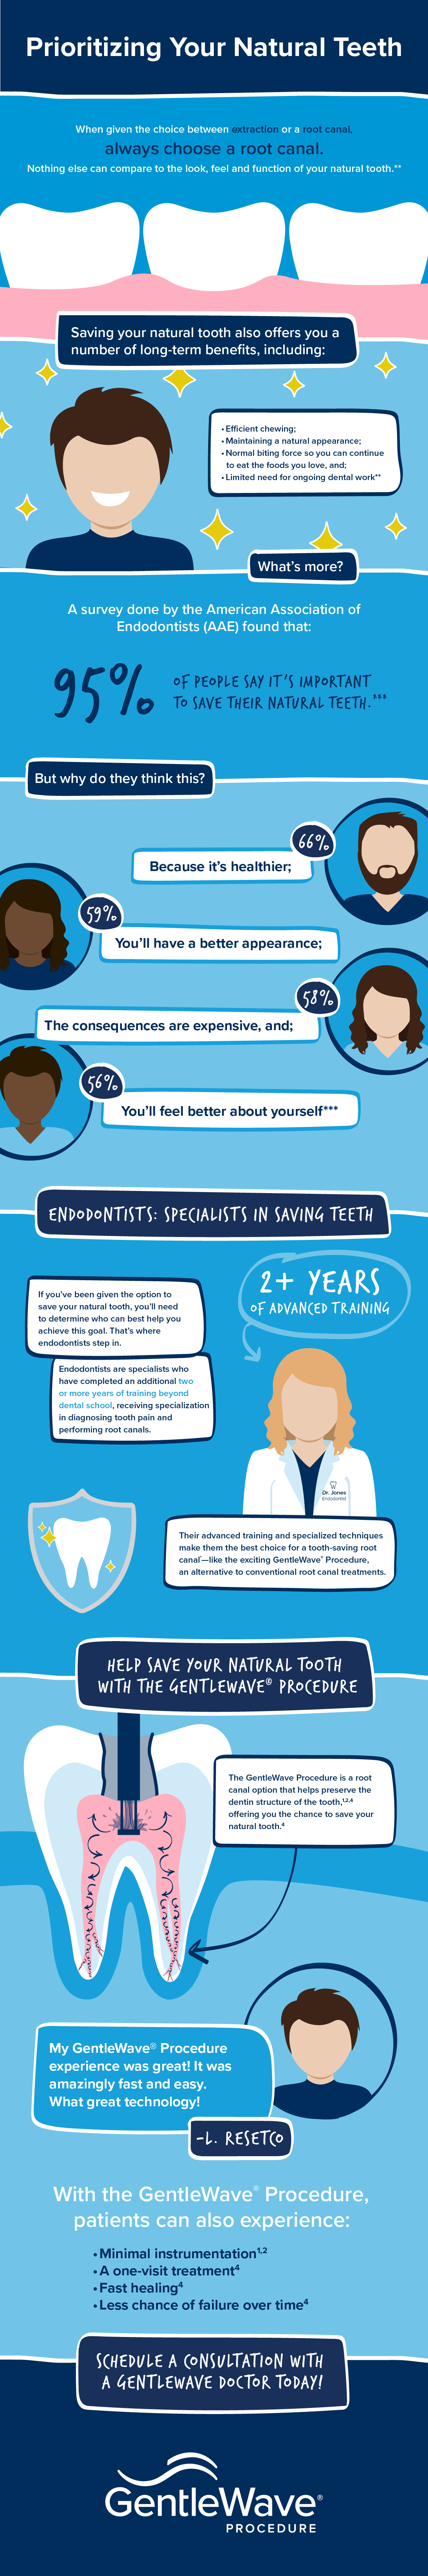 Save your natural teeth infographic